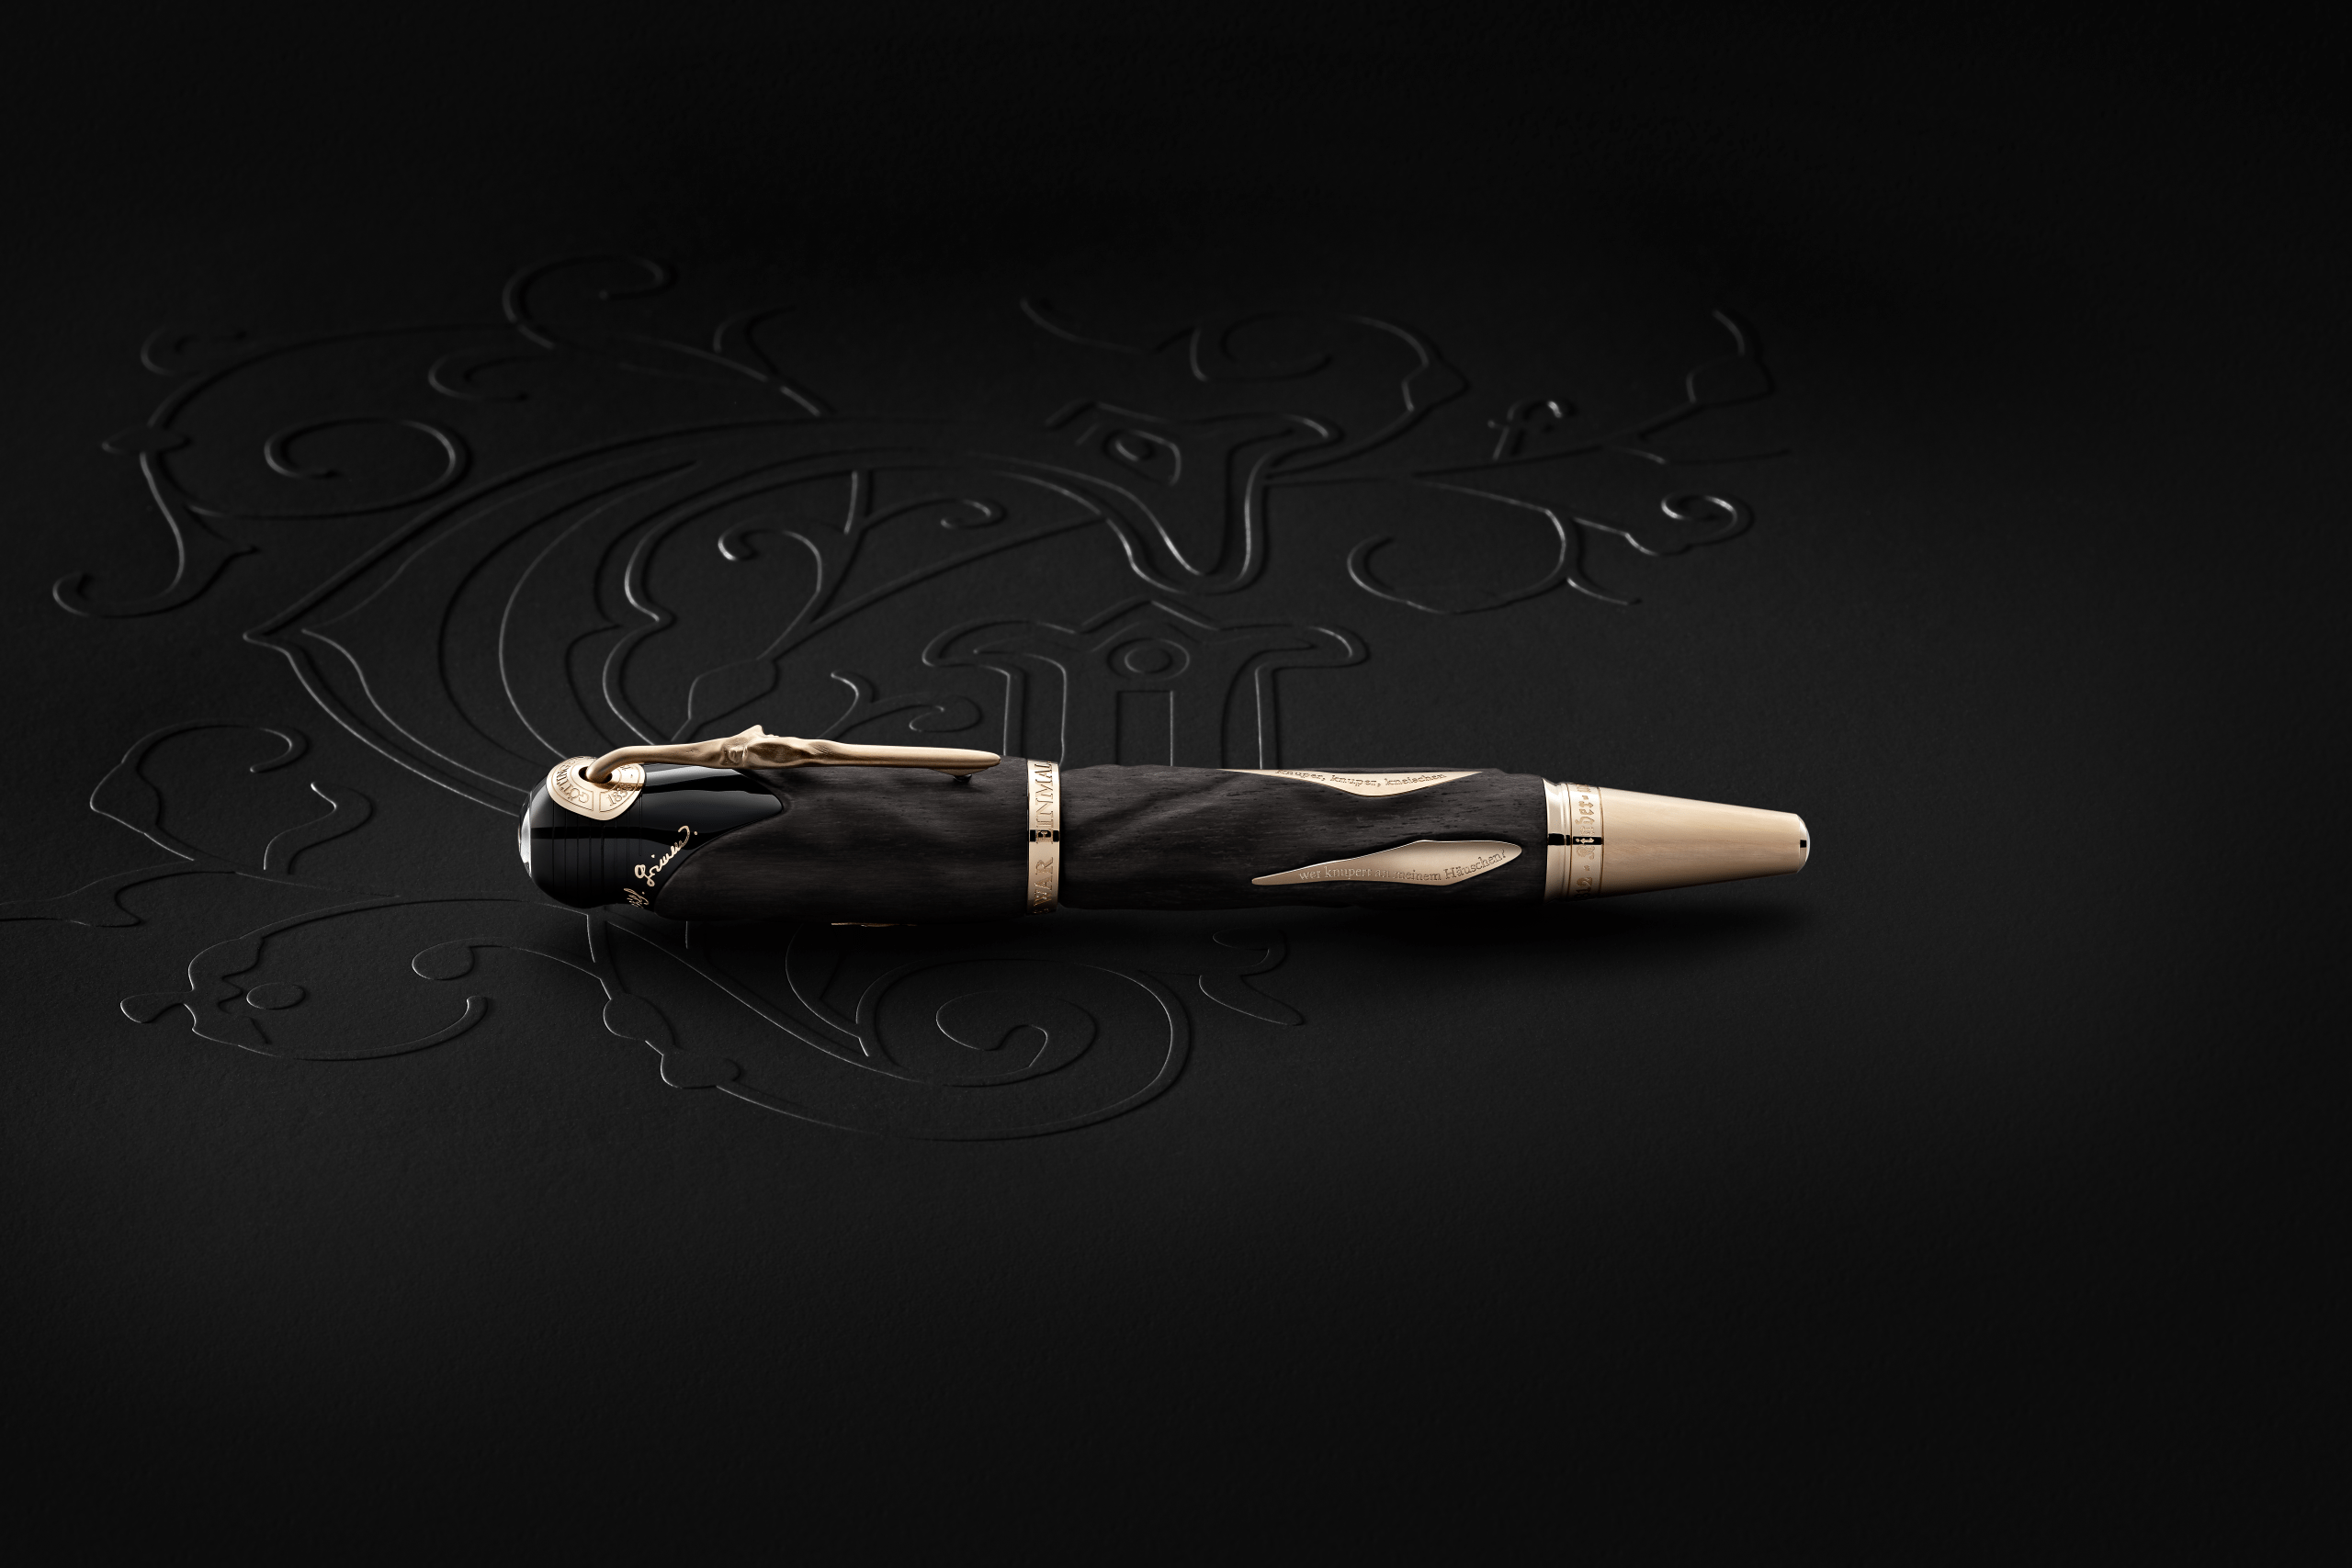 Limited Edition 86 Hermanos Grimm Montblanc